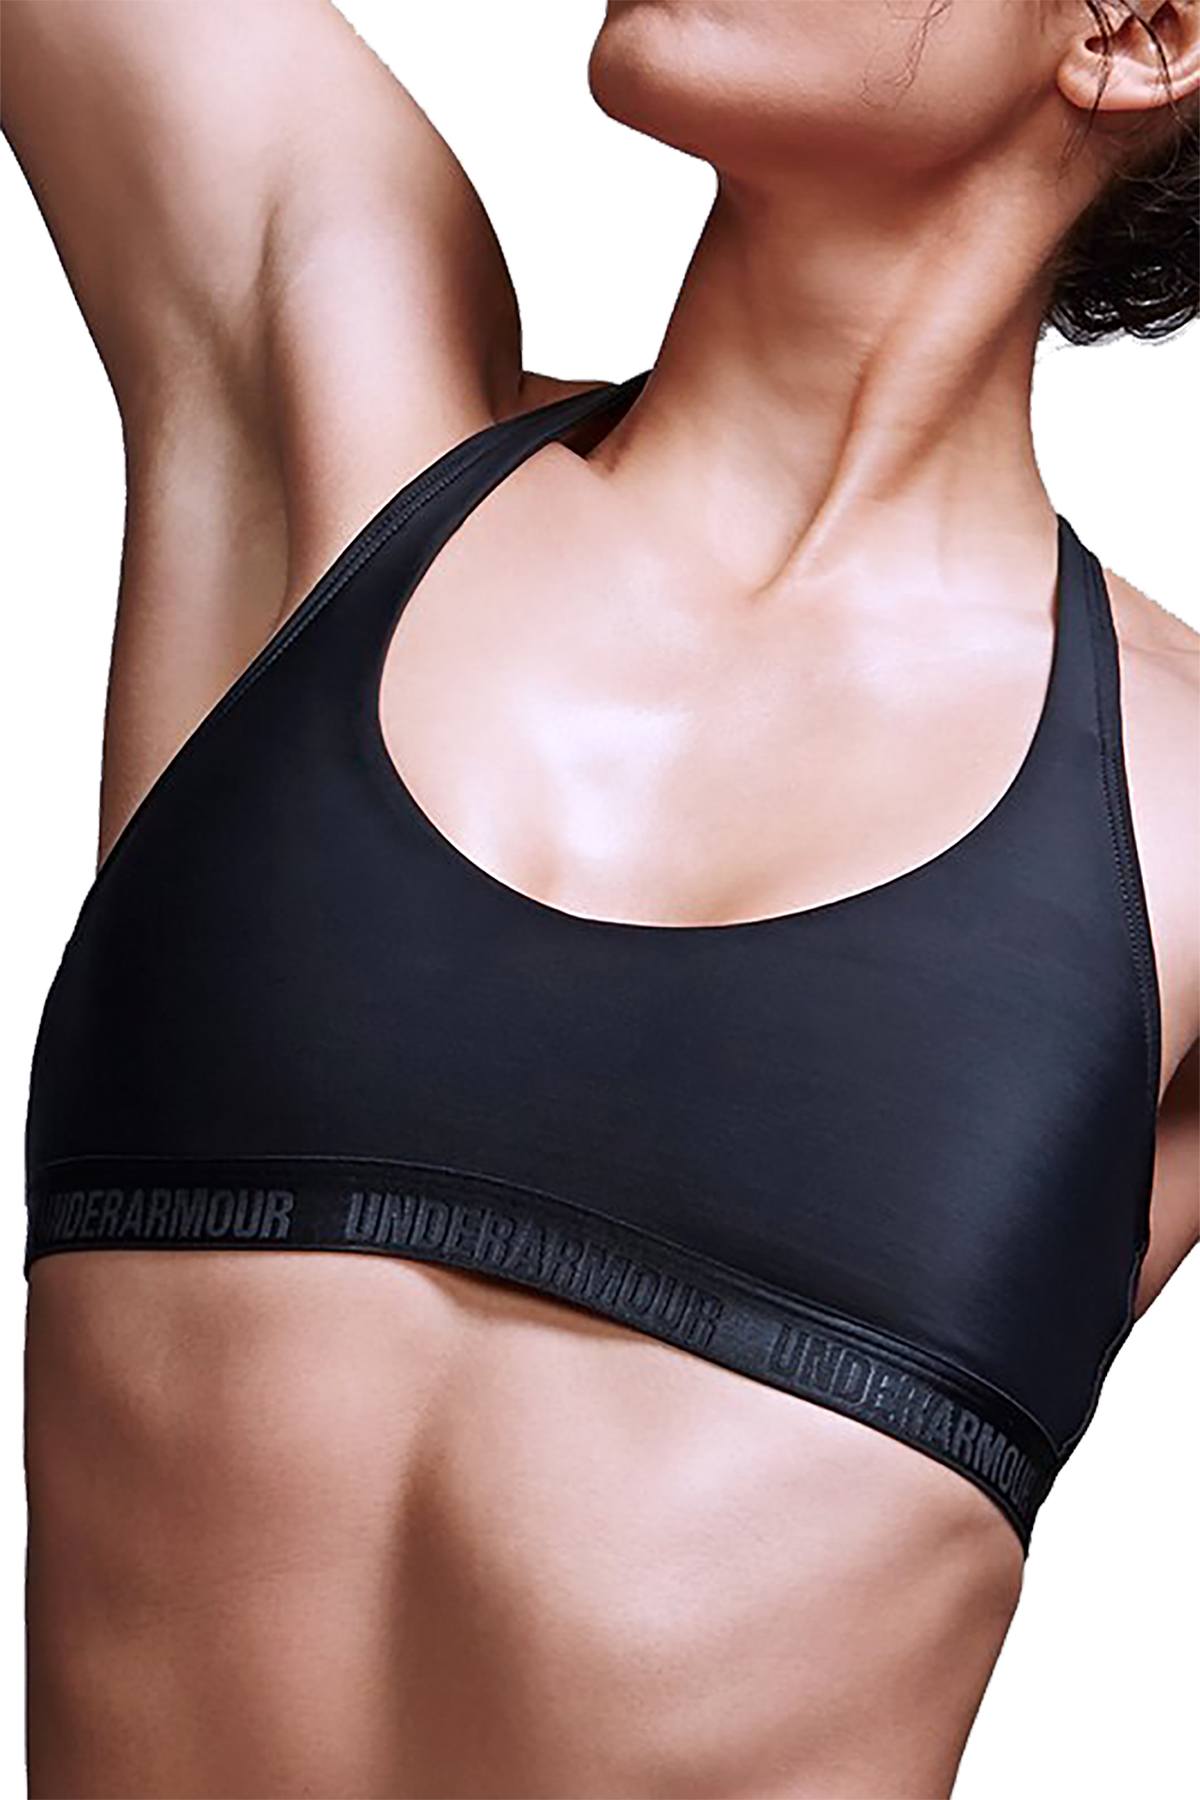 Under Armour Sports Bra With Cups And Band! Black - $10 (83% Off Retail) -  From Vic